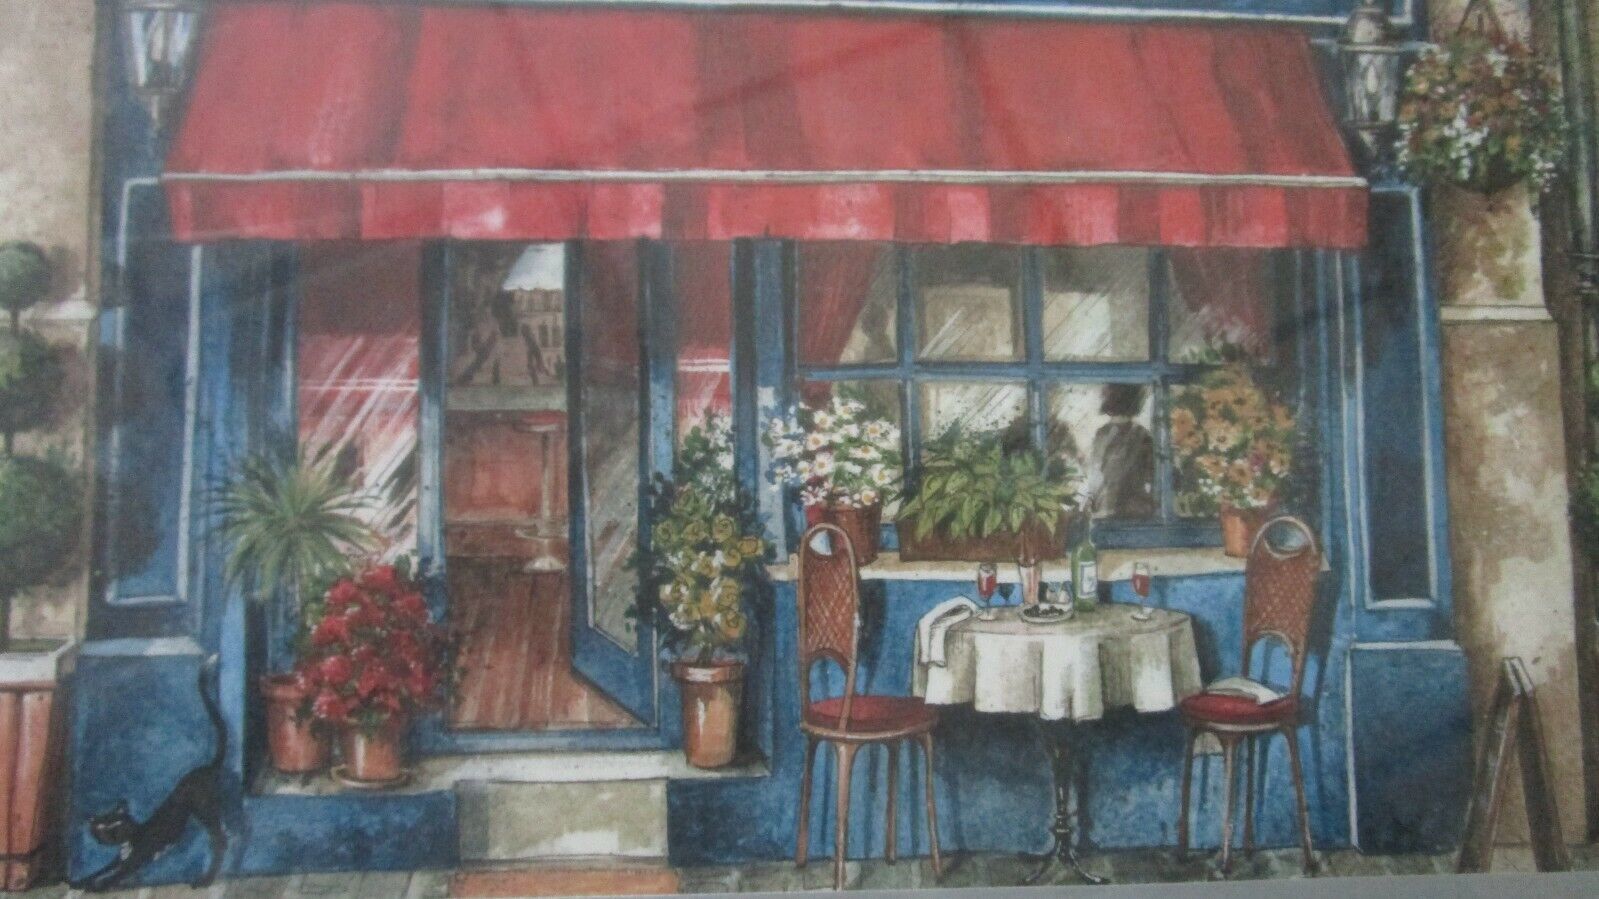 PIMPERNEL ENGLAND 6 PLACEMATS LE BISTRO PIERRE NEW IN BOX 11 X 9" - $94.05